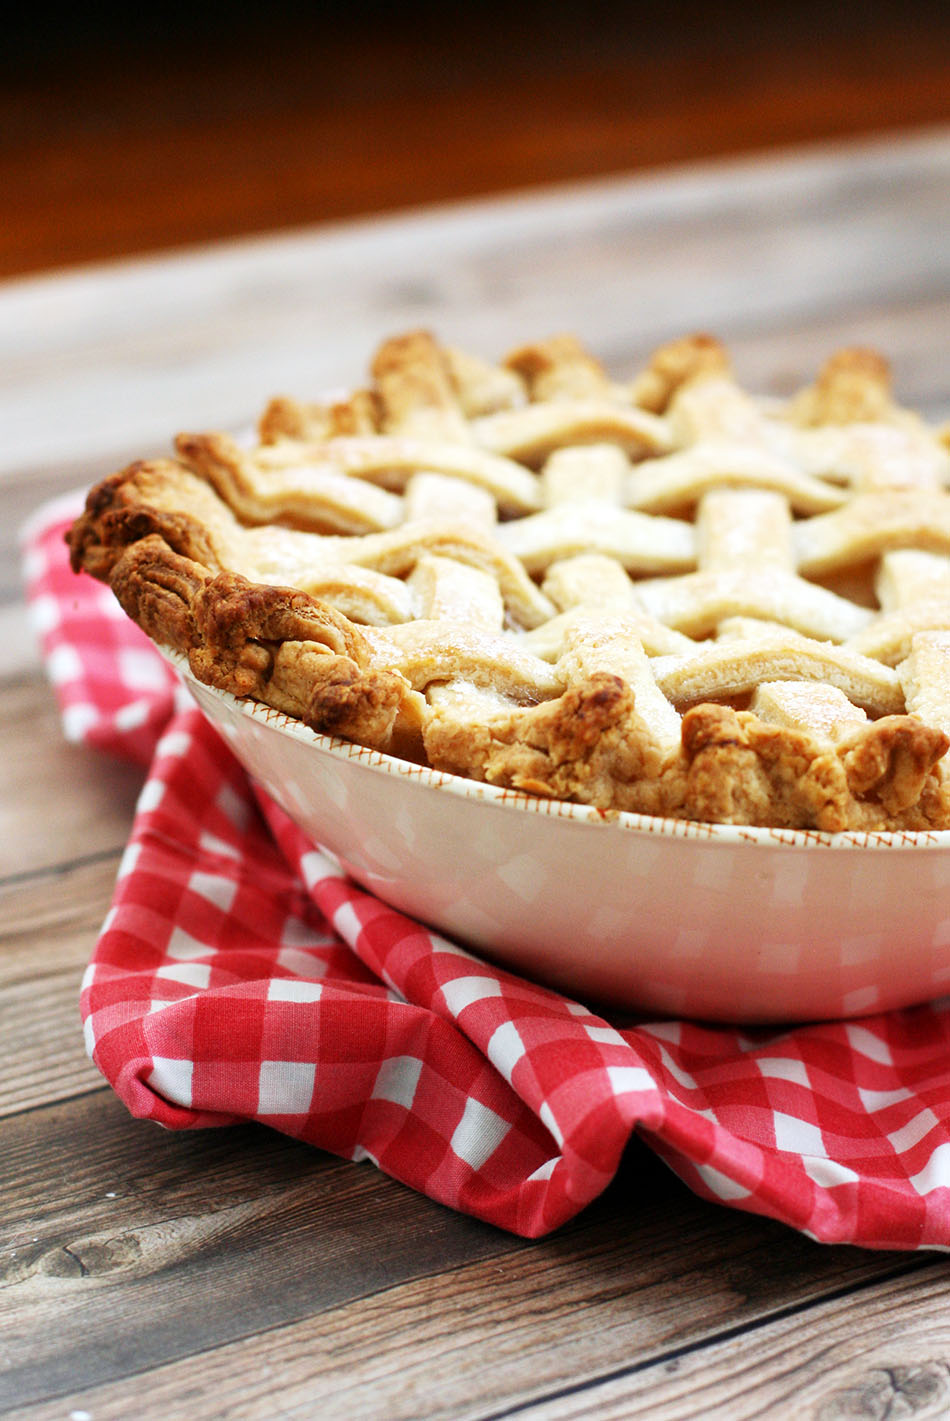 Pie in a bowl: Did you know that you can make pie in an ovenproof bowl? Believe it!